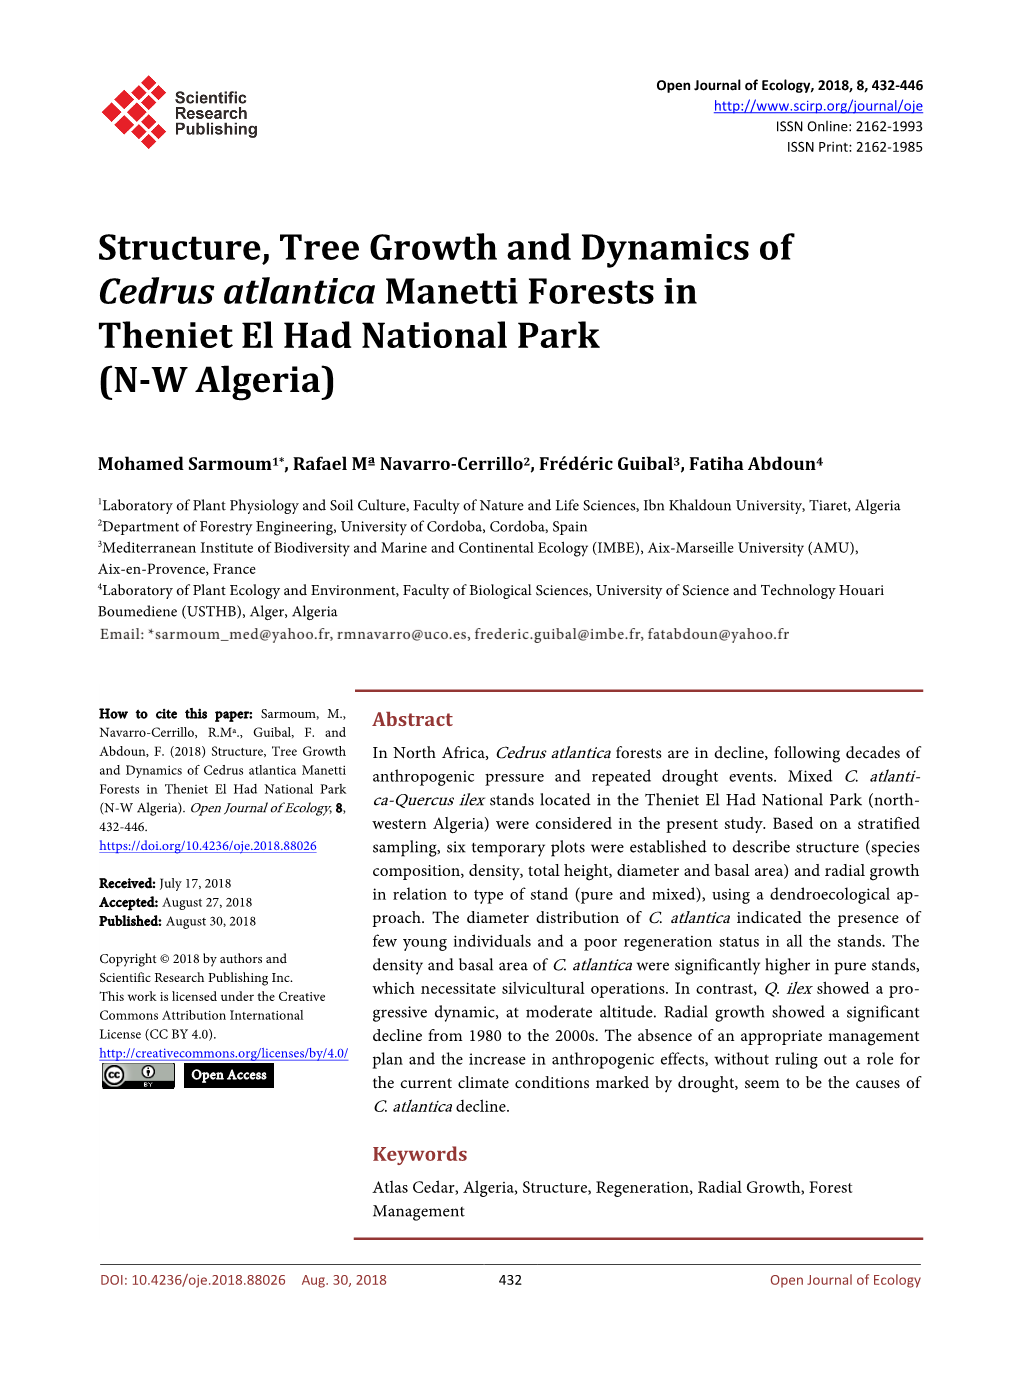 Structure, Tree Growth and Dynamics of Cedrus Atlantica Manetti Forests in Theniet El Had National Park (N-W Algeria)